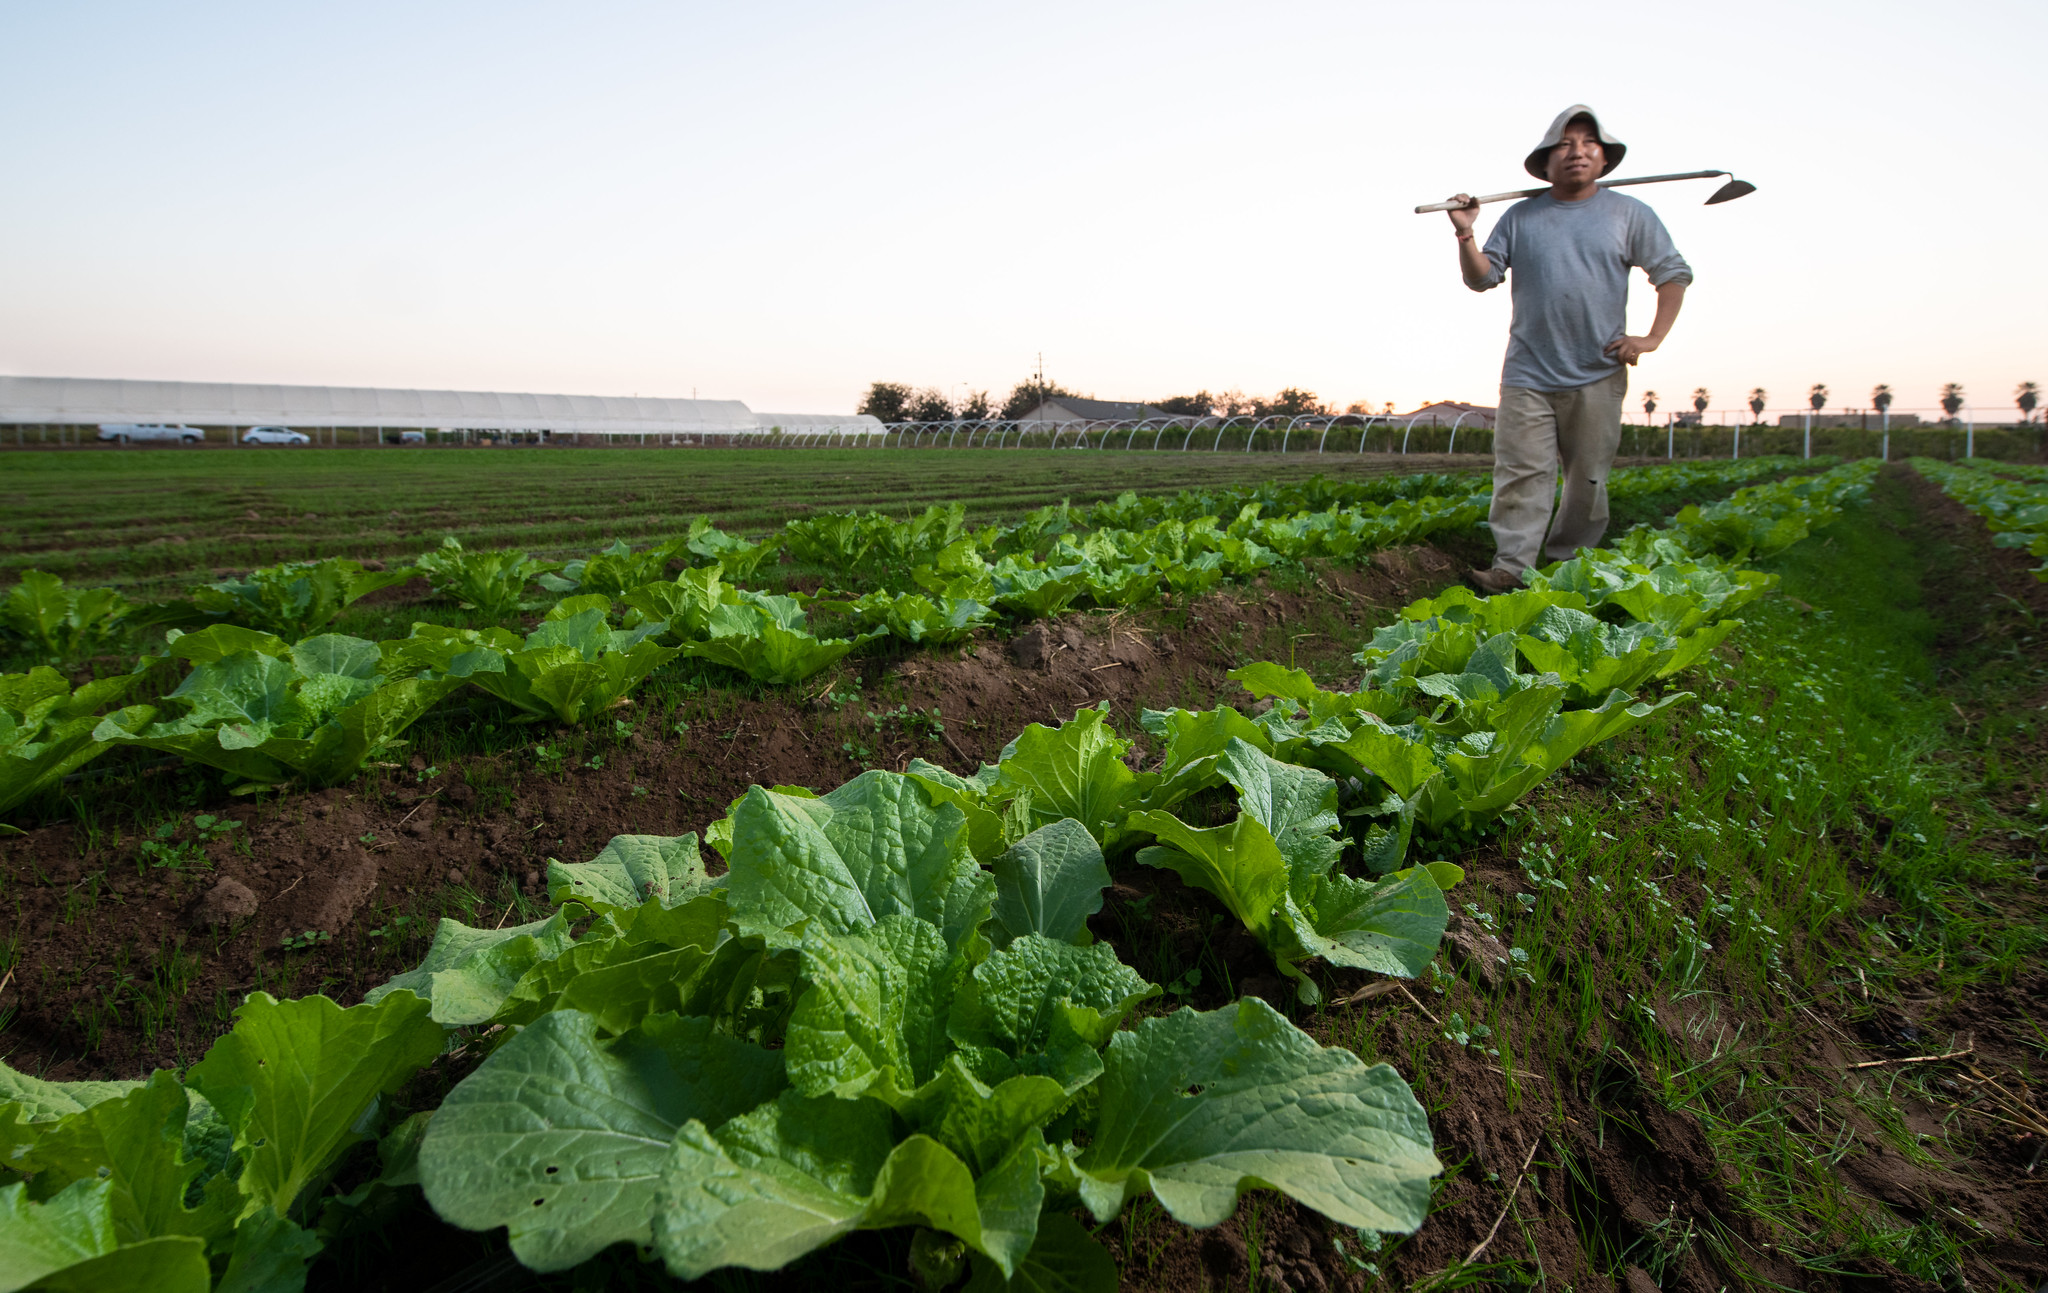 New $25 Million Funding Opportunity to Provide Technical Assistance to Underserved Farmers Closes Soon